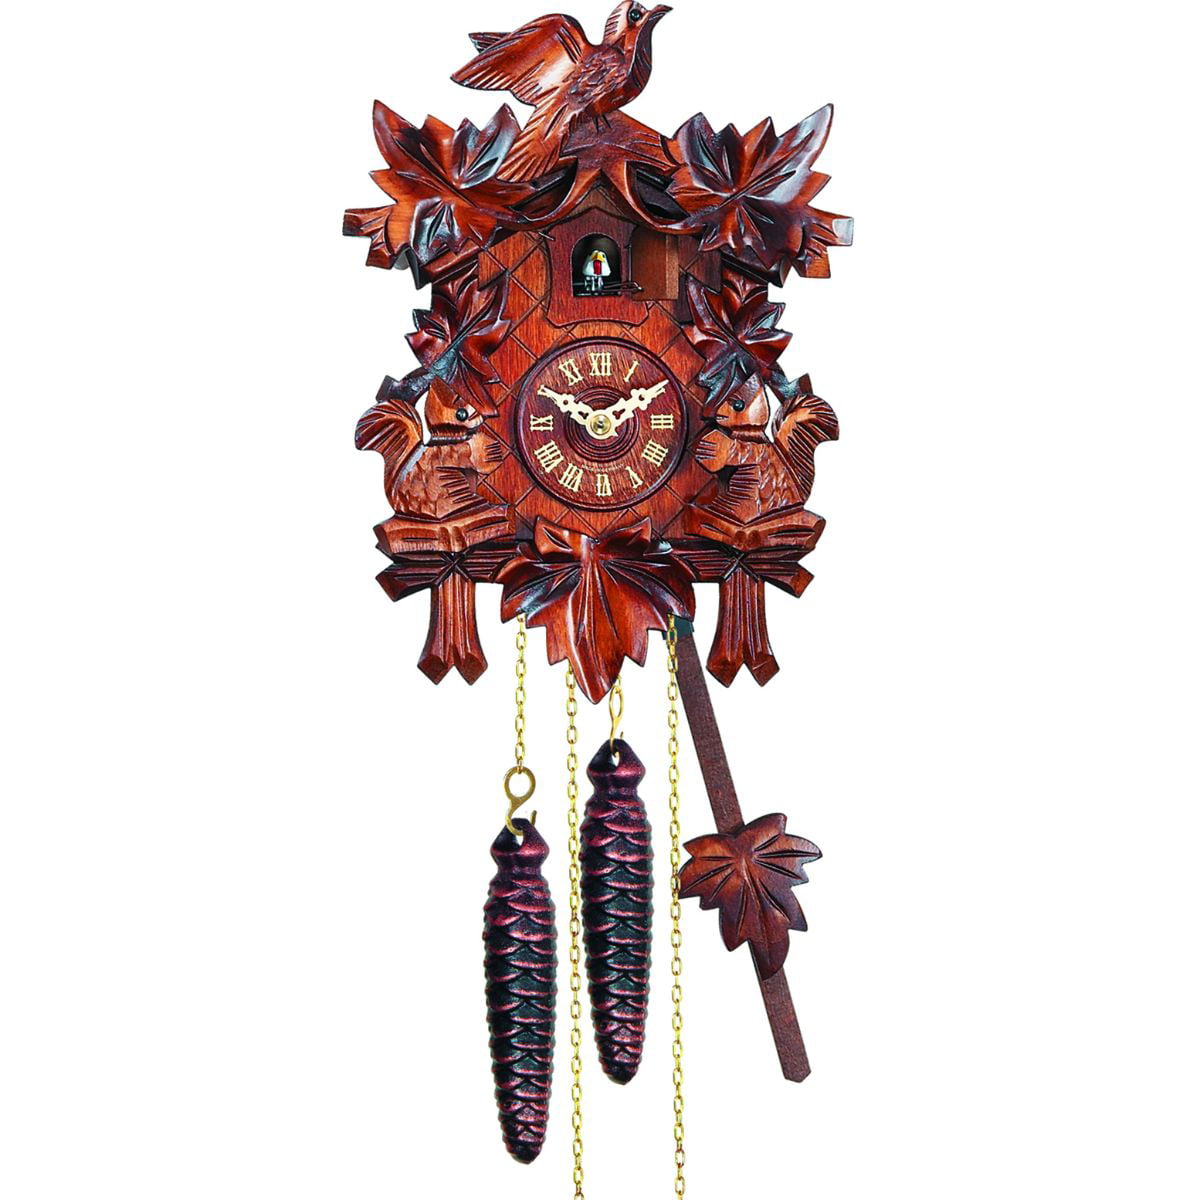 10-Inch Engstler Full Size Cuckoo Wall Clock With Birds and Squirrels ...